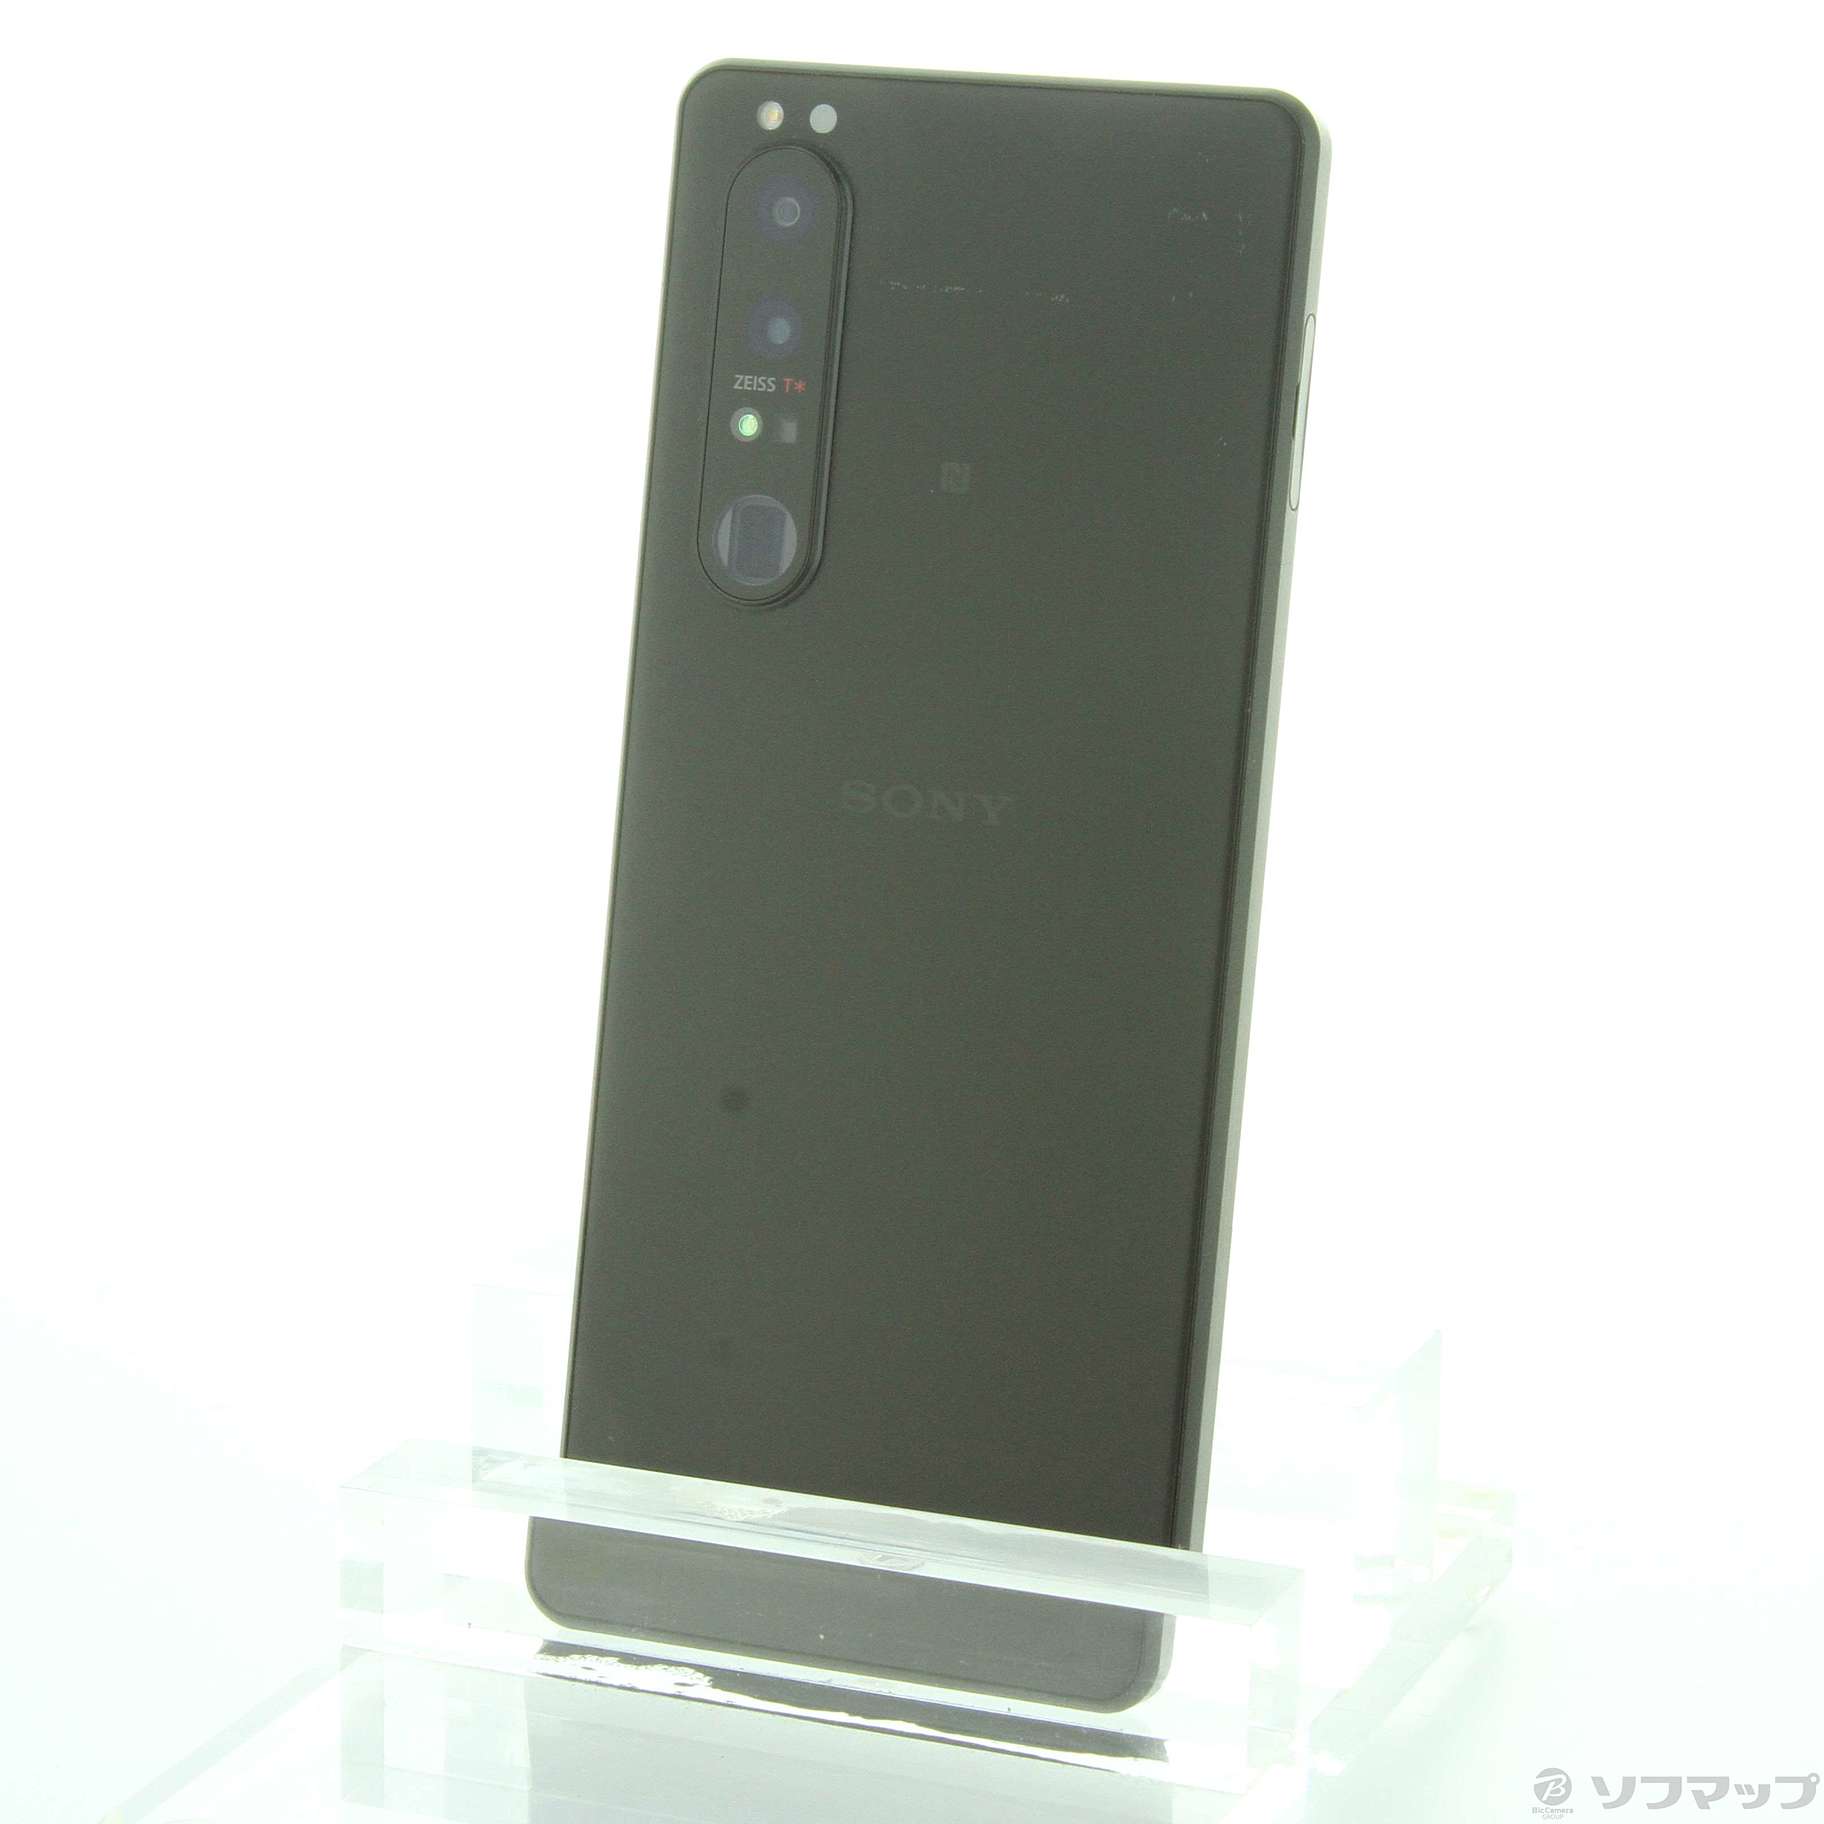 Xperia 1 III フロストブラック 256 GB SIMロック解除済み-